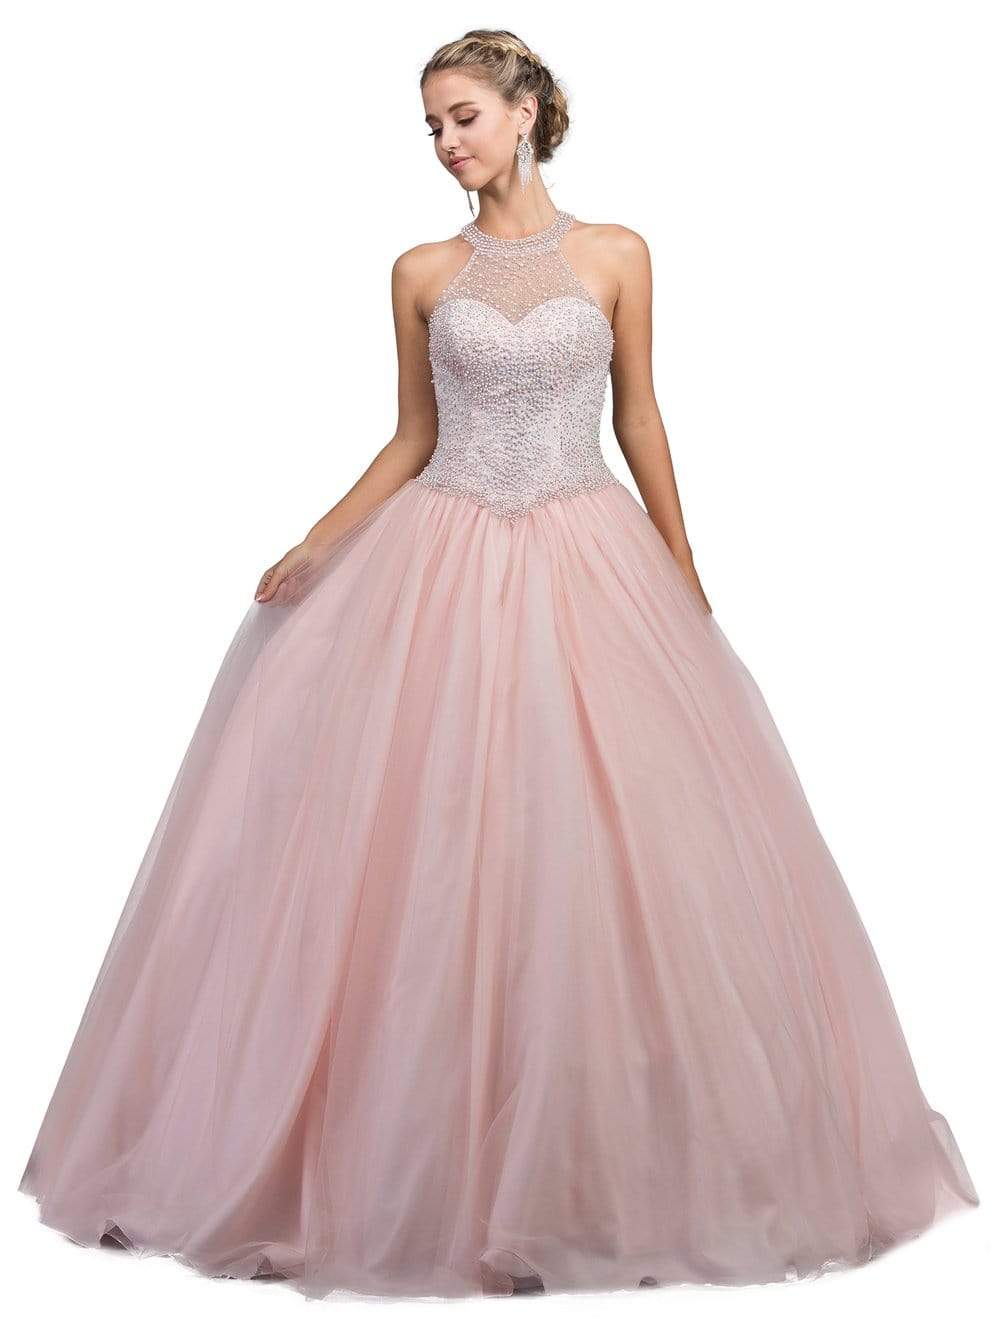 Dancing Queen Bridal - 1169 Sophisticated Halter Illusion Long Gown Special Occasion Dress XS / Blush